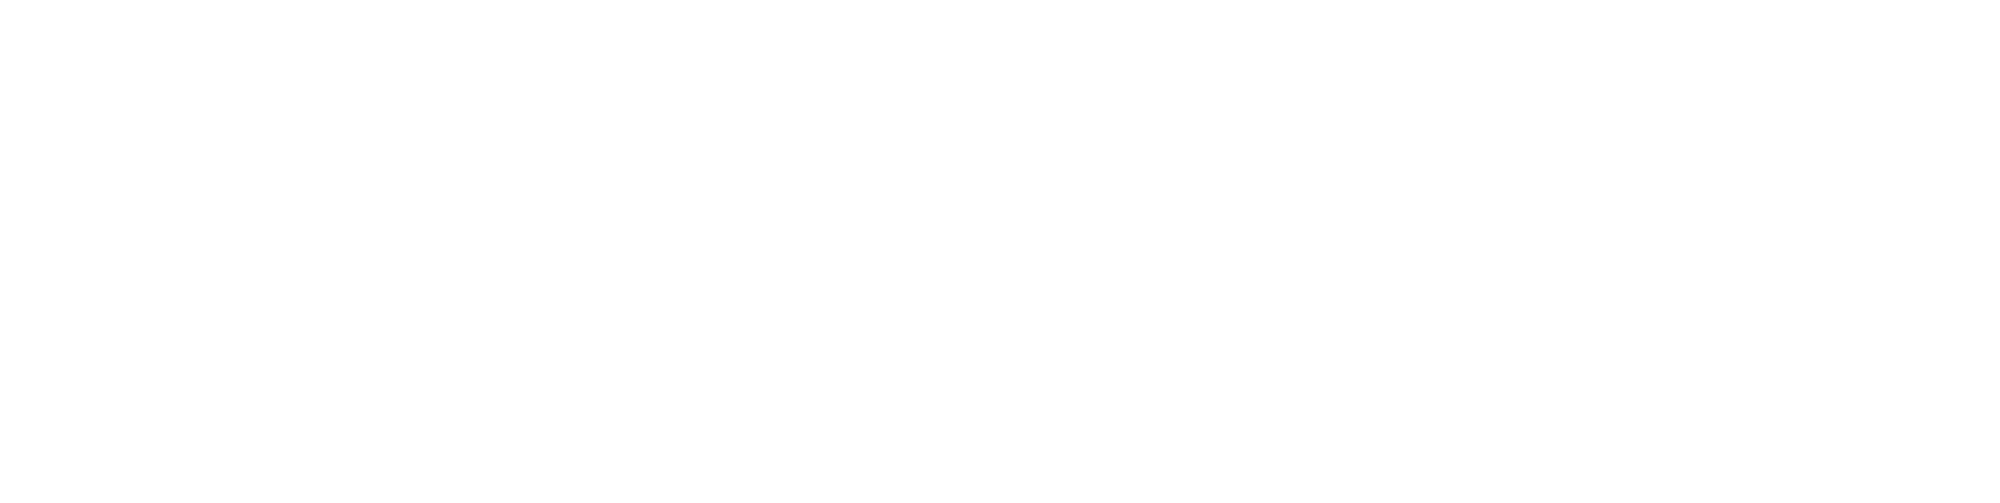 Electrical Review